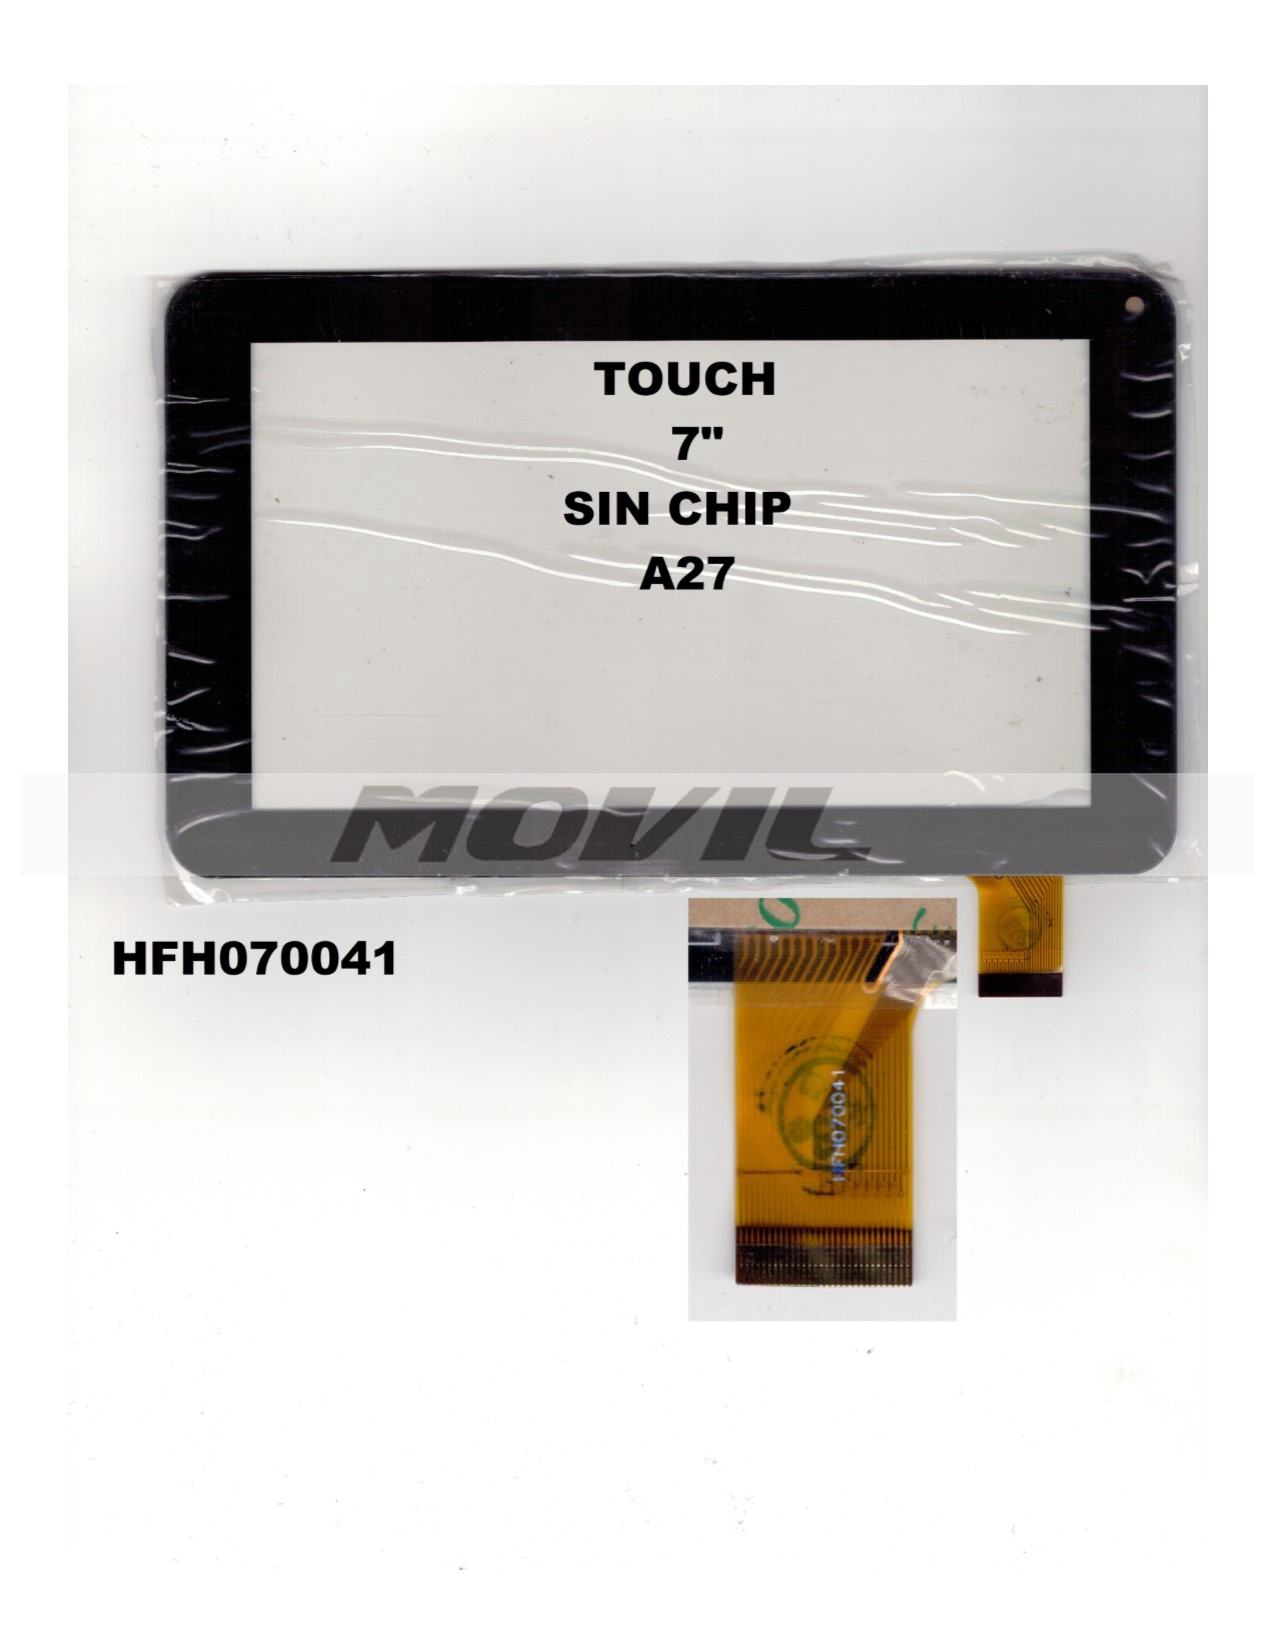 Touch tactil para tablet flex 7 inch SIN CHIP A27 HFH070041